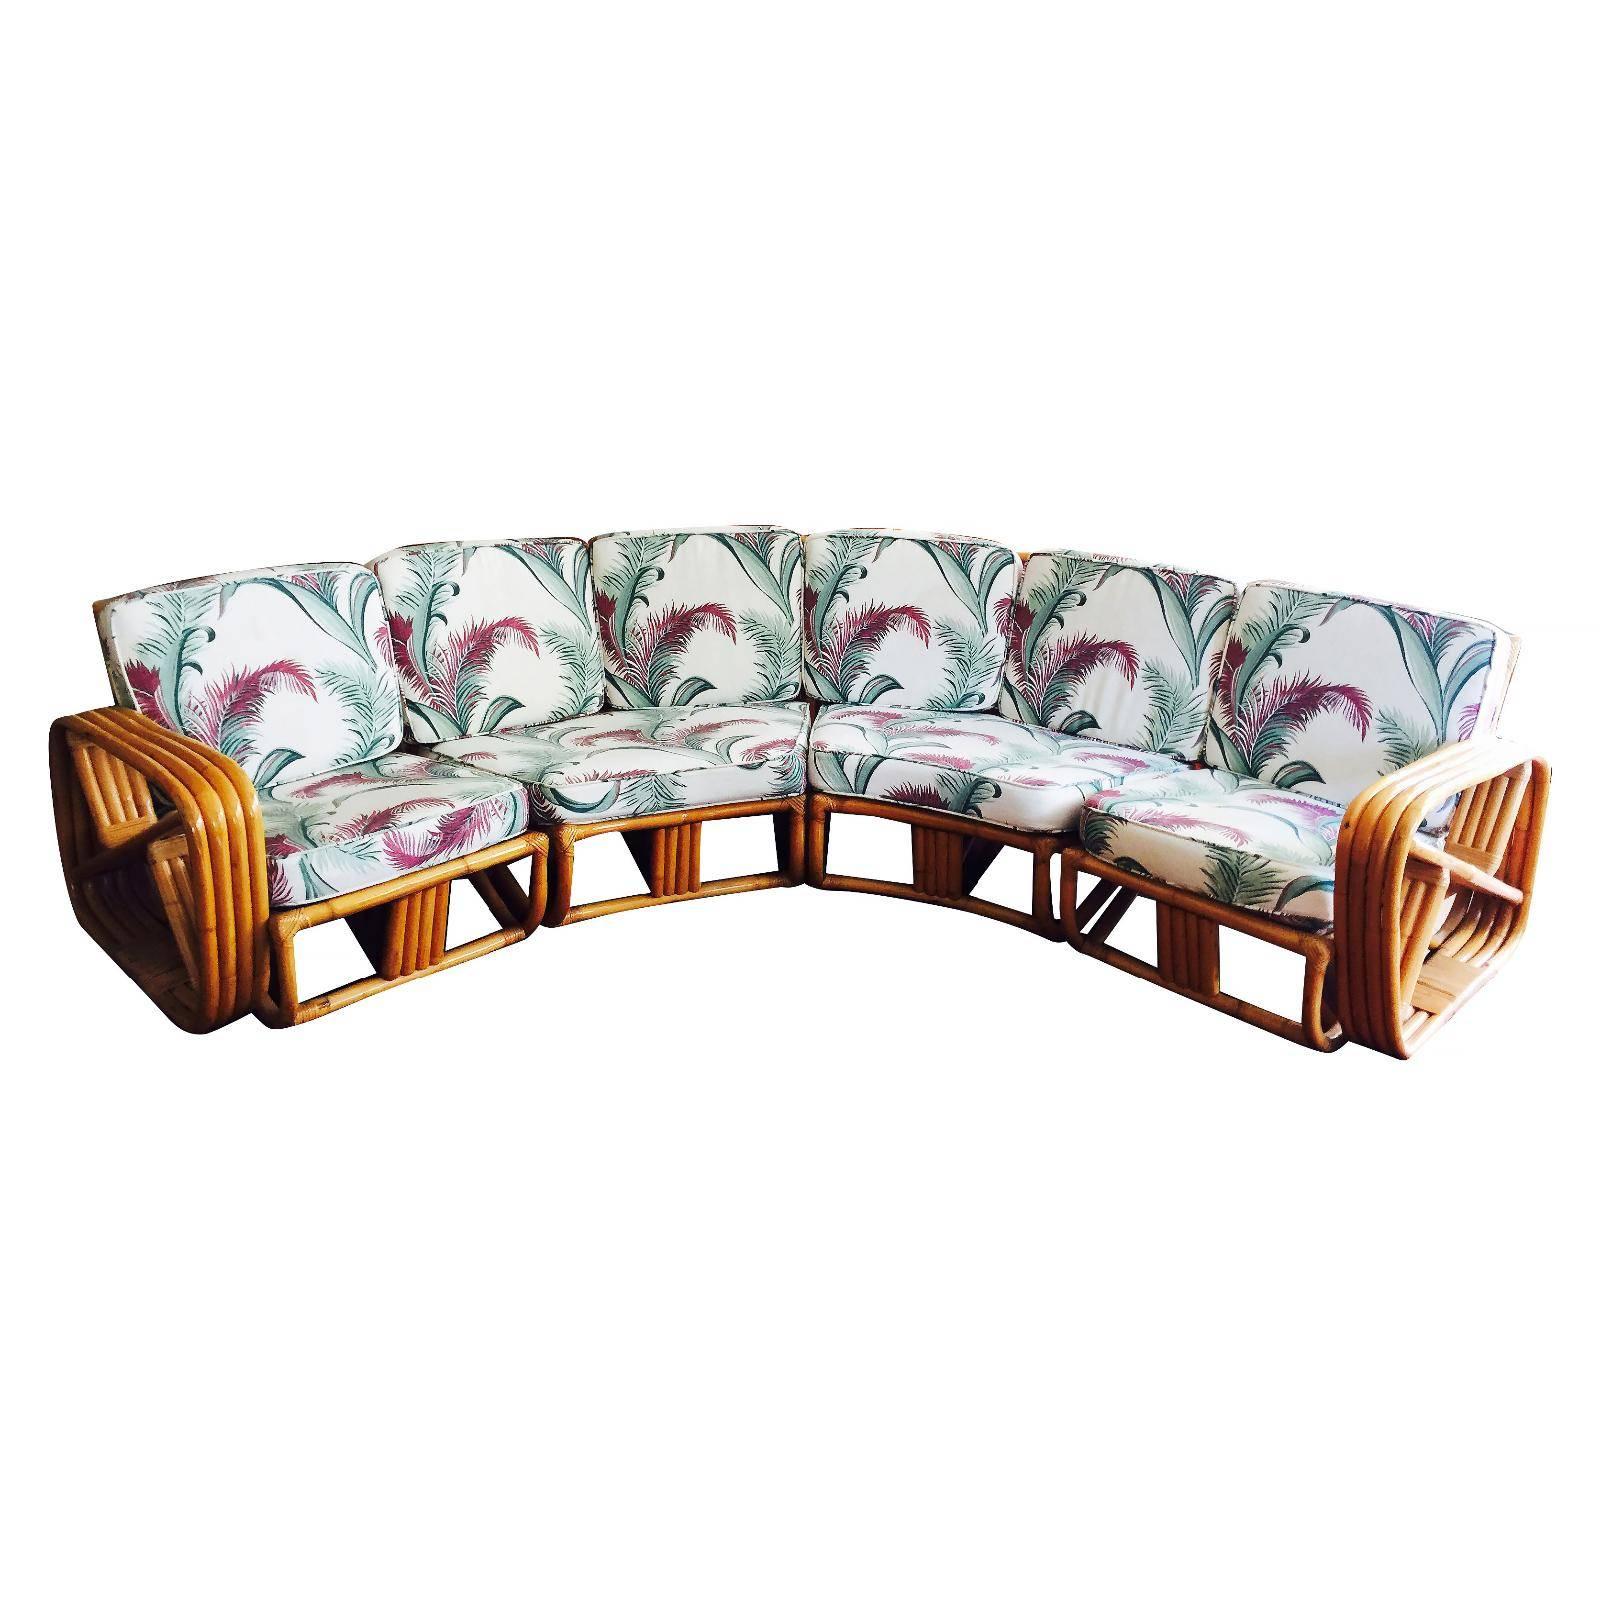 Four strand square pretzel Corner rattan sectional sofa . This sofa features a bent rattan base with four strand square pretzel arms and is divided into a four sectional, two end pieces that each fit one person each and two large double person